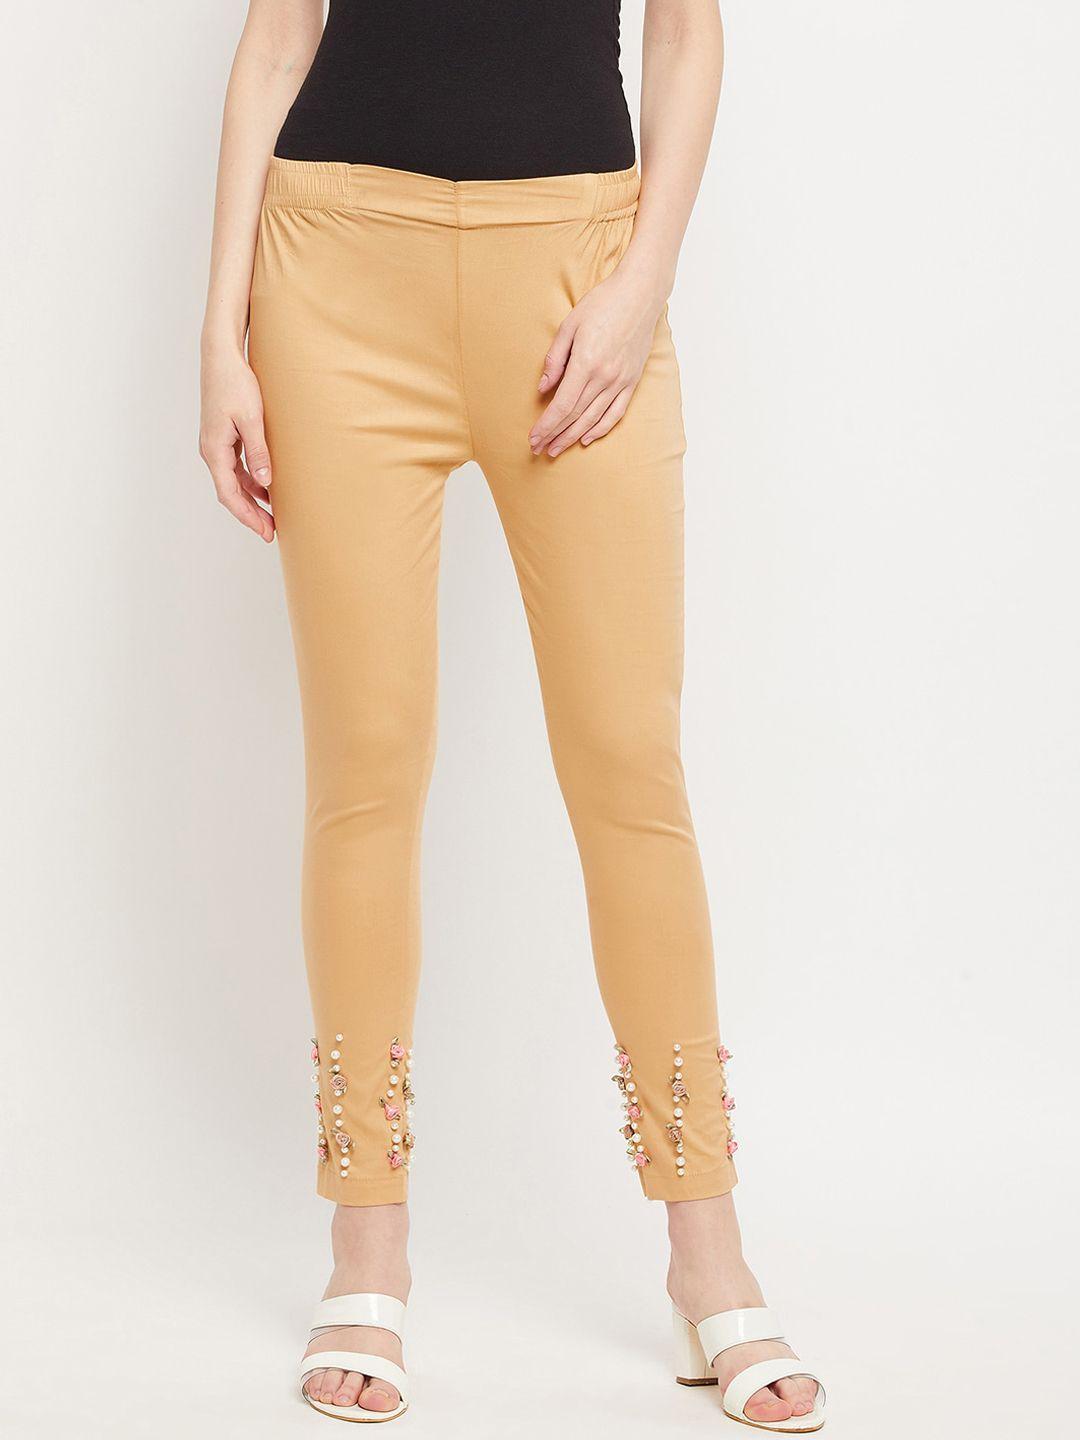 clora creation women cotton embellished trousers